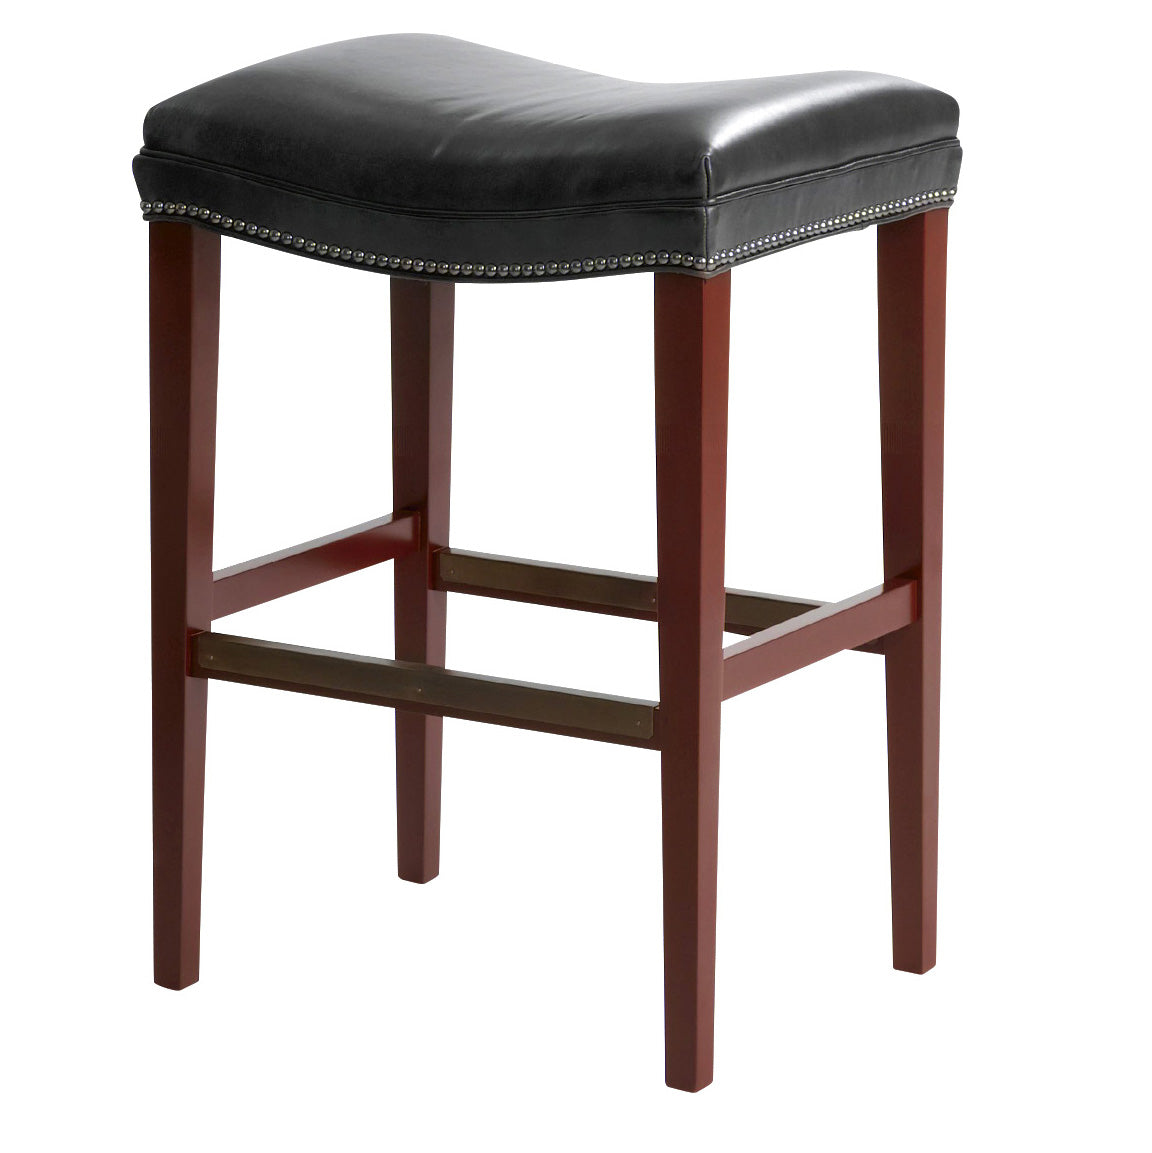 Dylan Leather Bar Stool in Dynasty Graphite by Wesley Hall